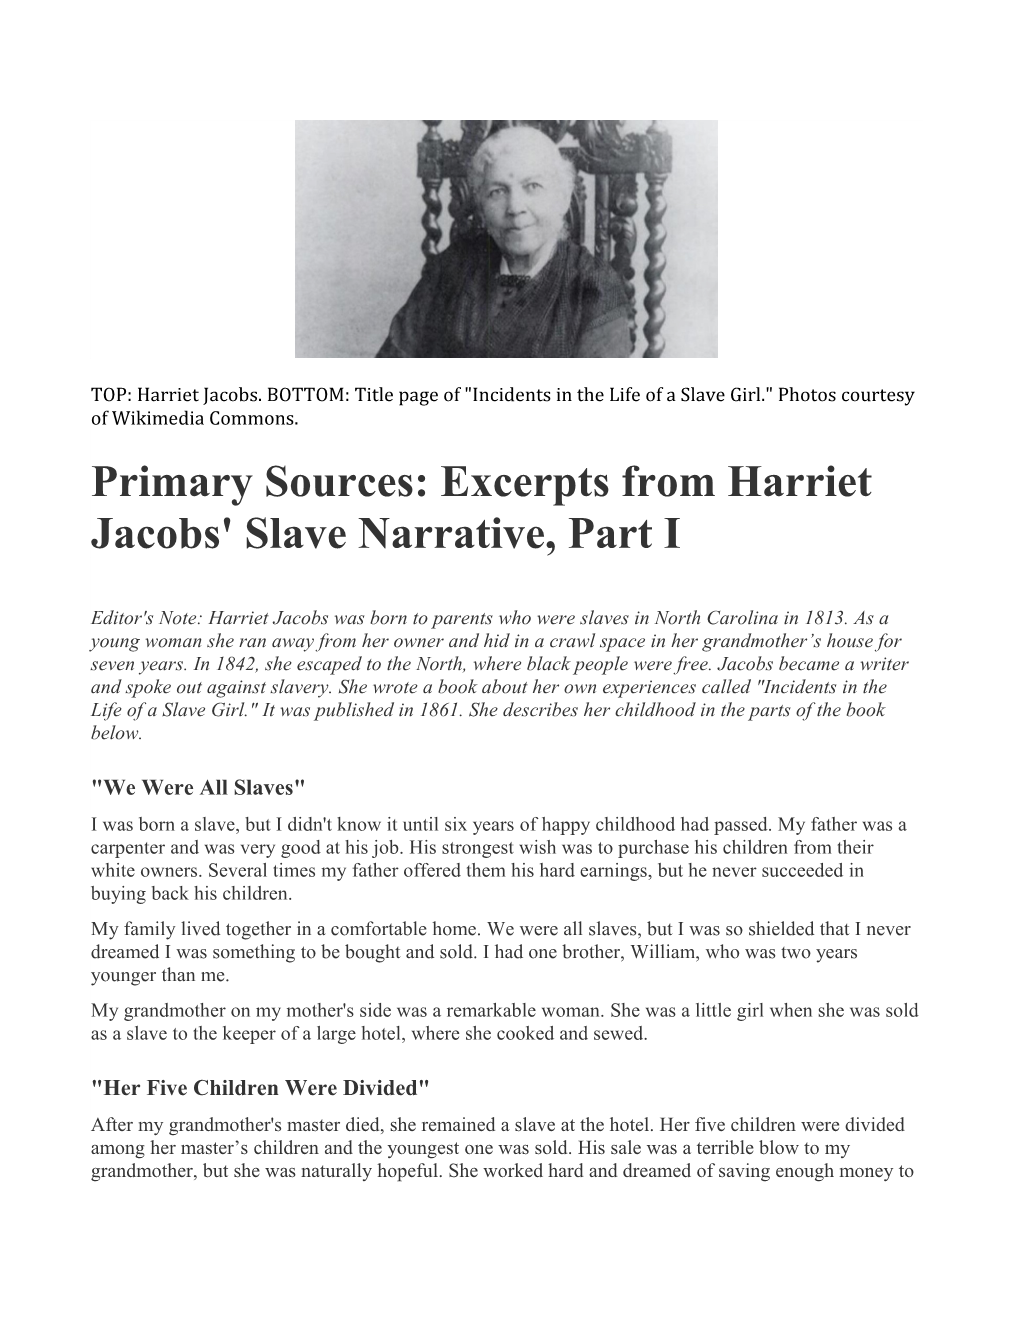 Primary Sources: Excerpts from Harriet Jacobs' Slave Narrative, Part I